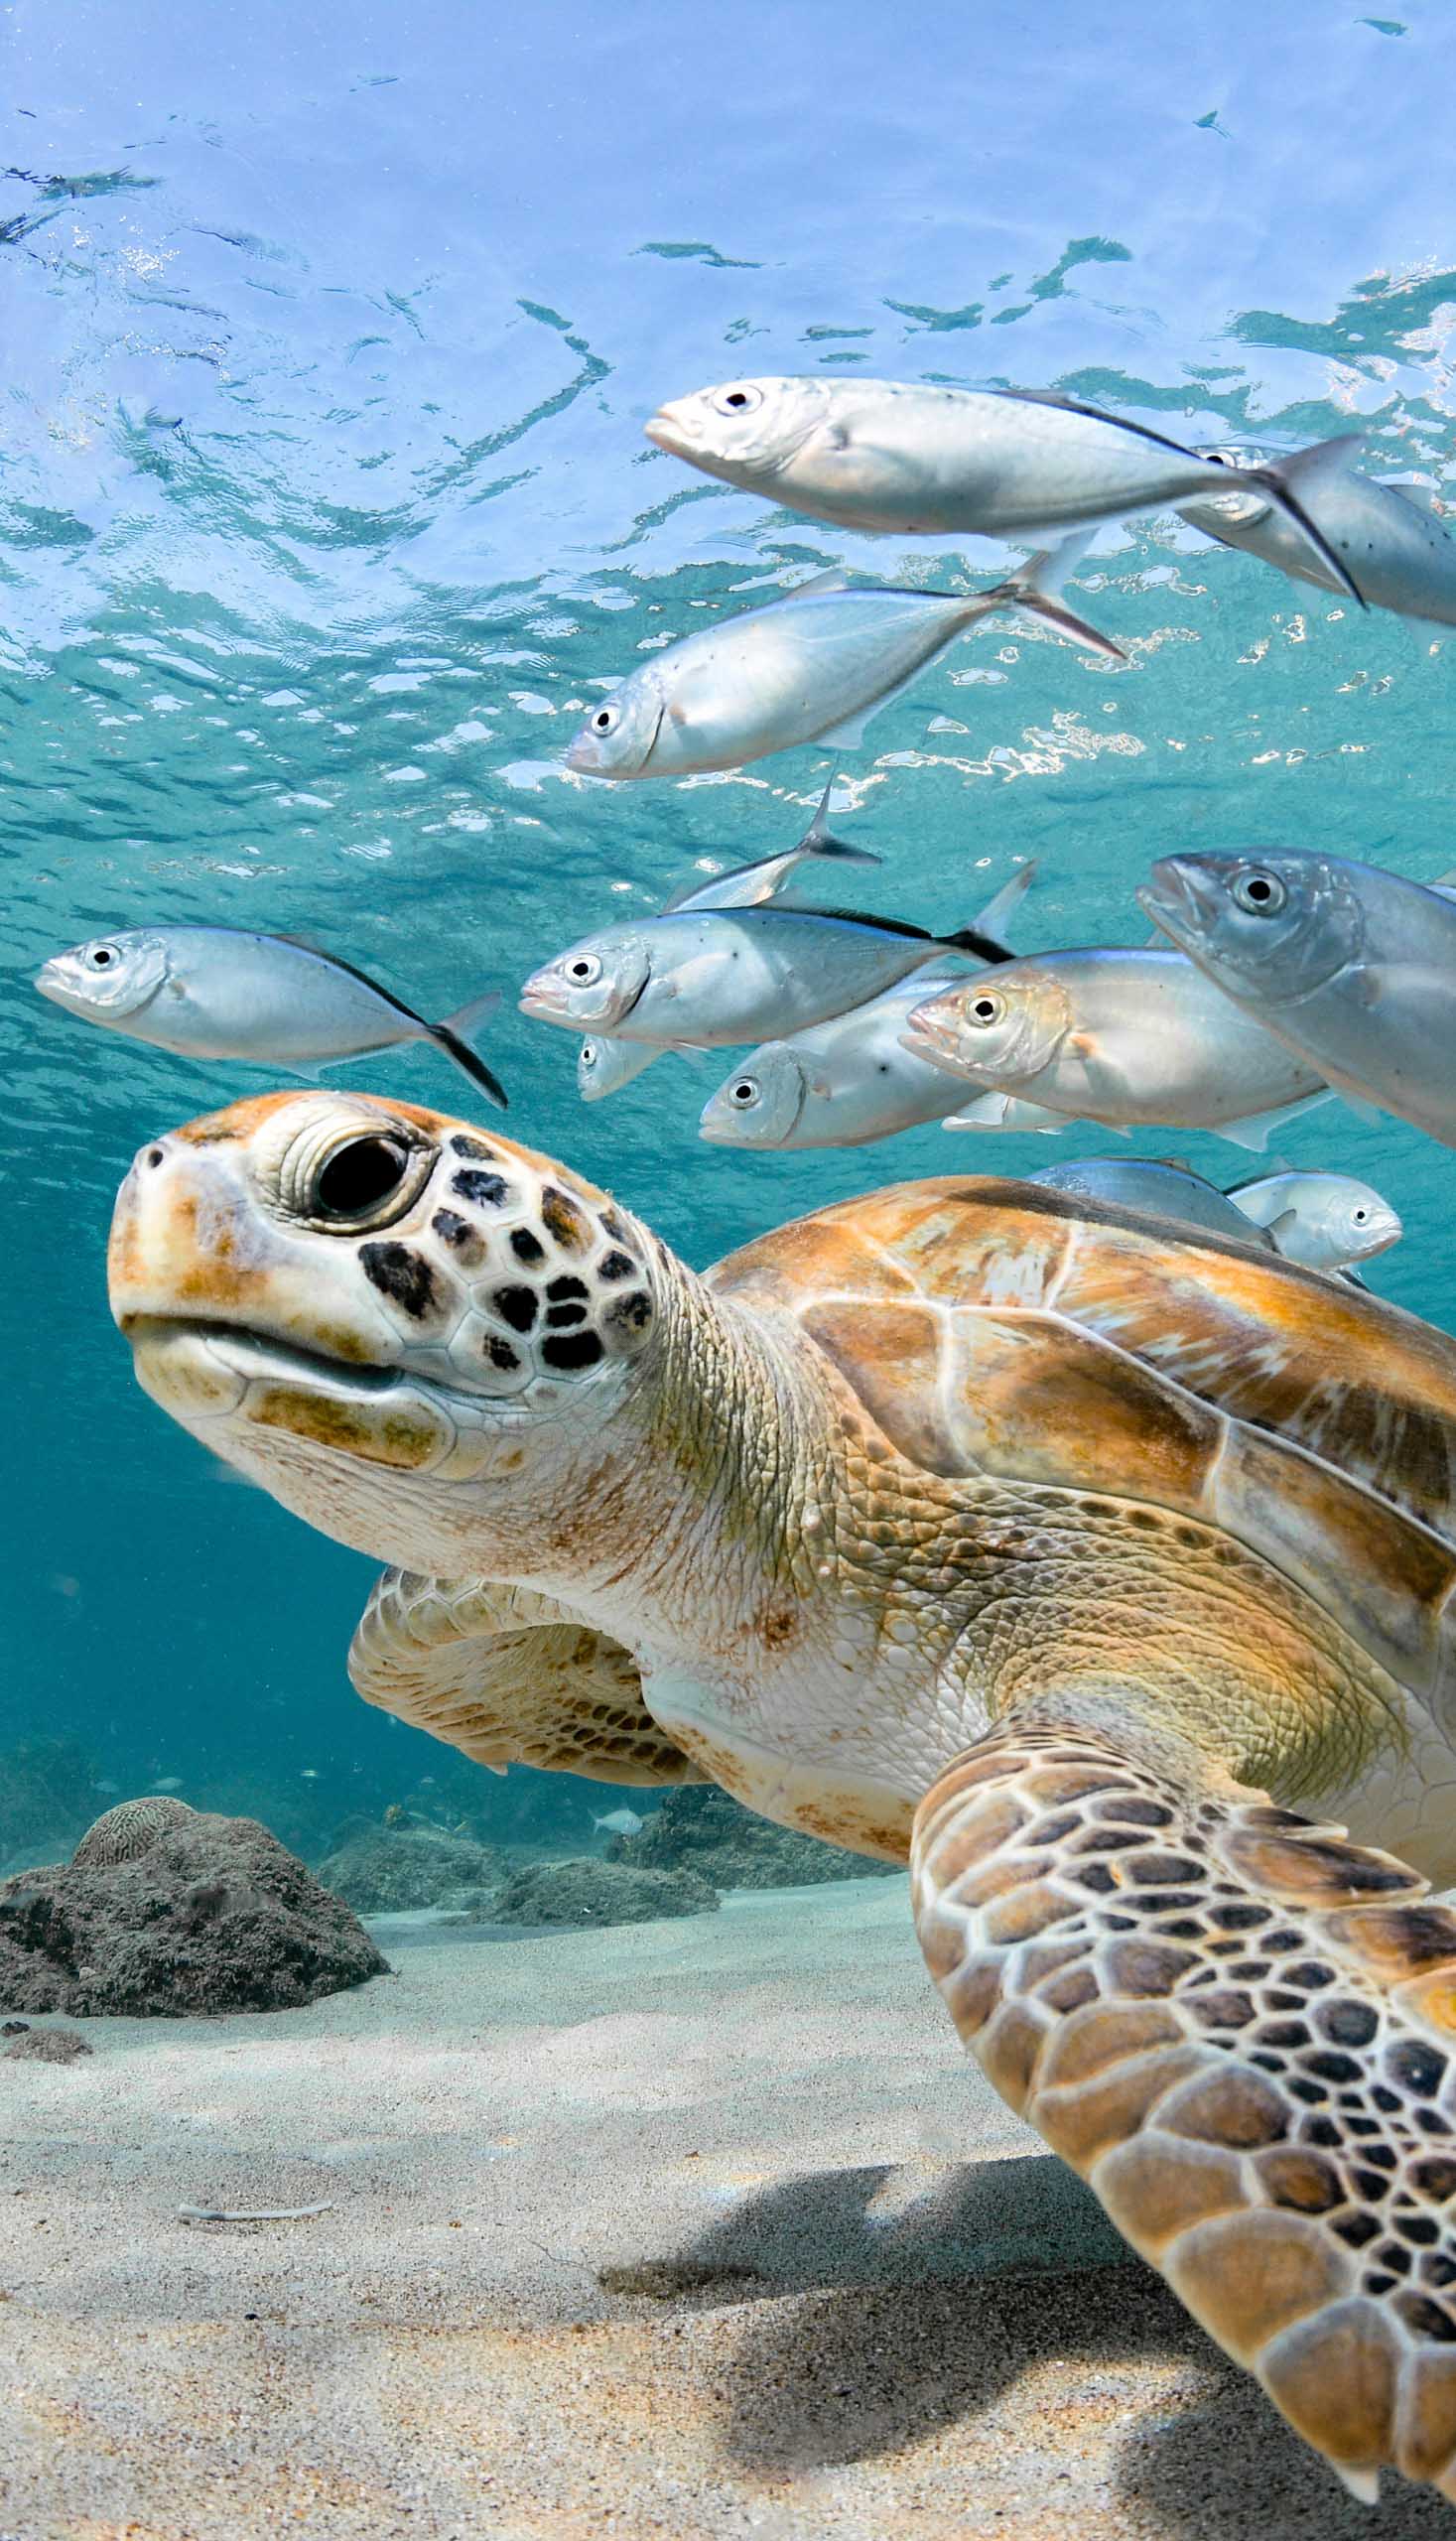 A sea turtle and a school of fish.